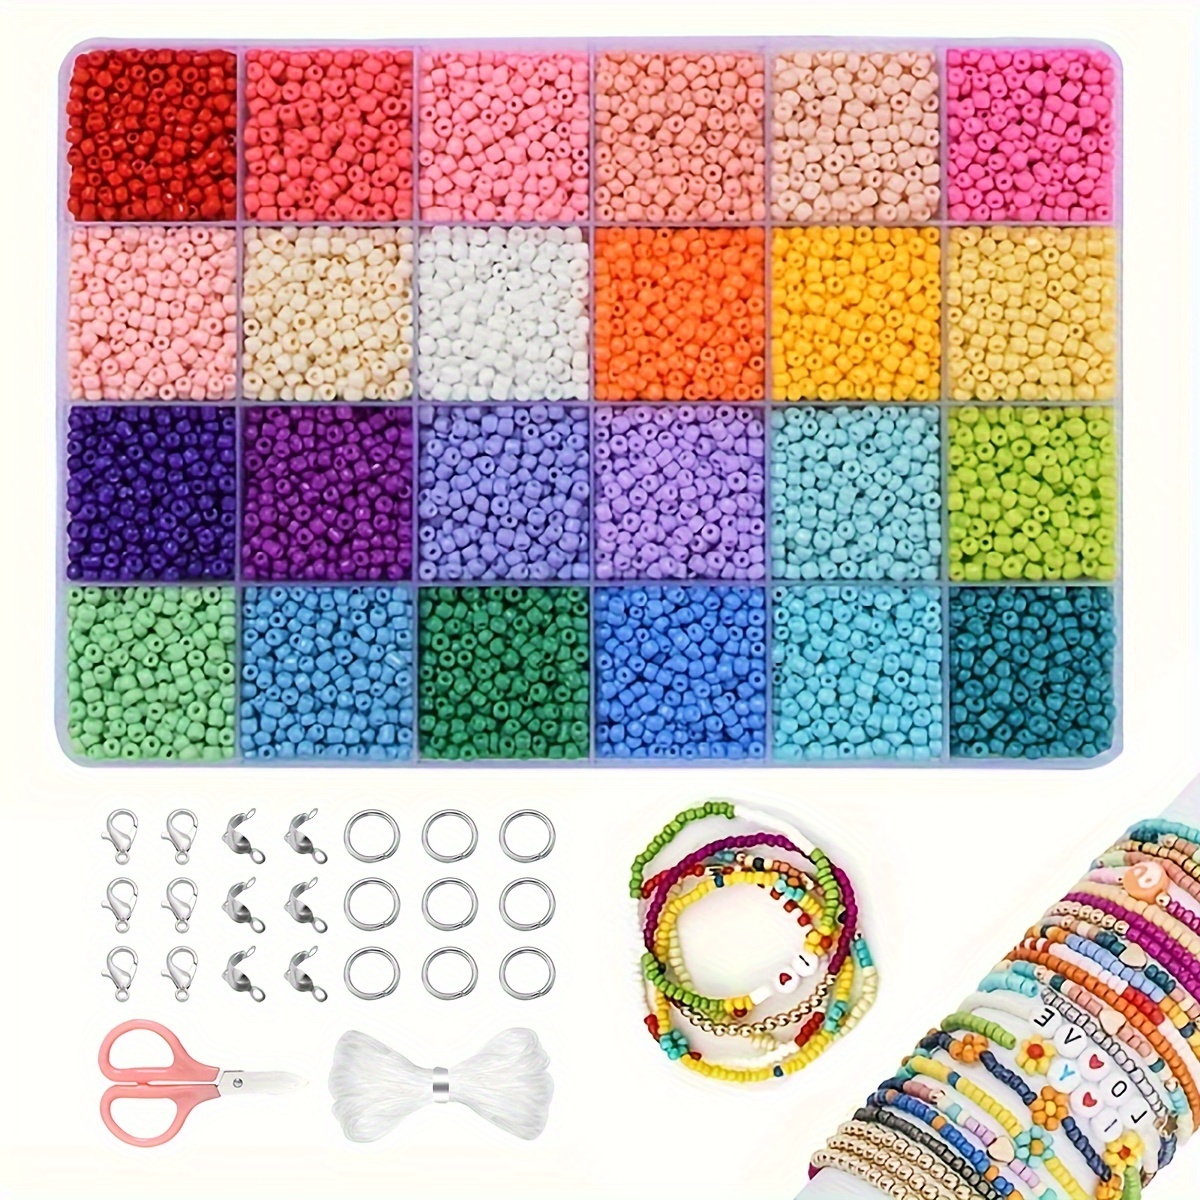 

24 Colors Glass Seed Beads Kit, 5760pcs, 3mm, Diy Jewelry Making Set For Bracelets, Necklaces, Earrings, Party Style Accessories With Storage Box